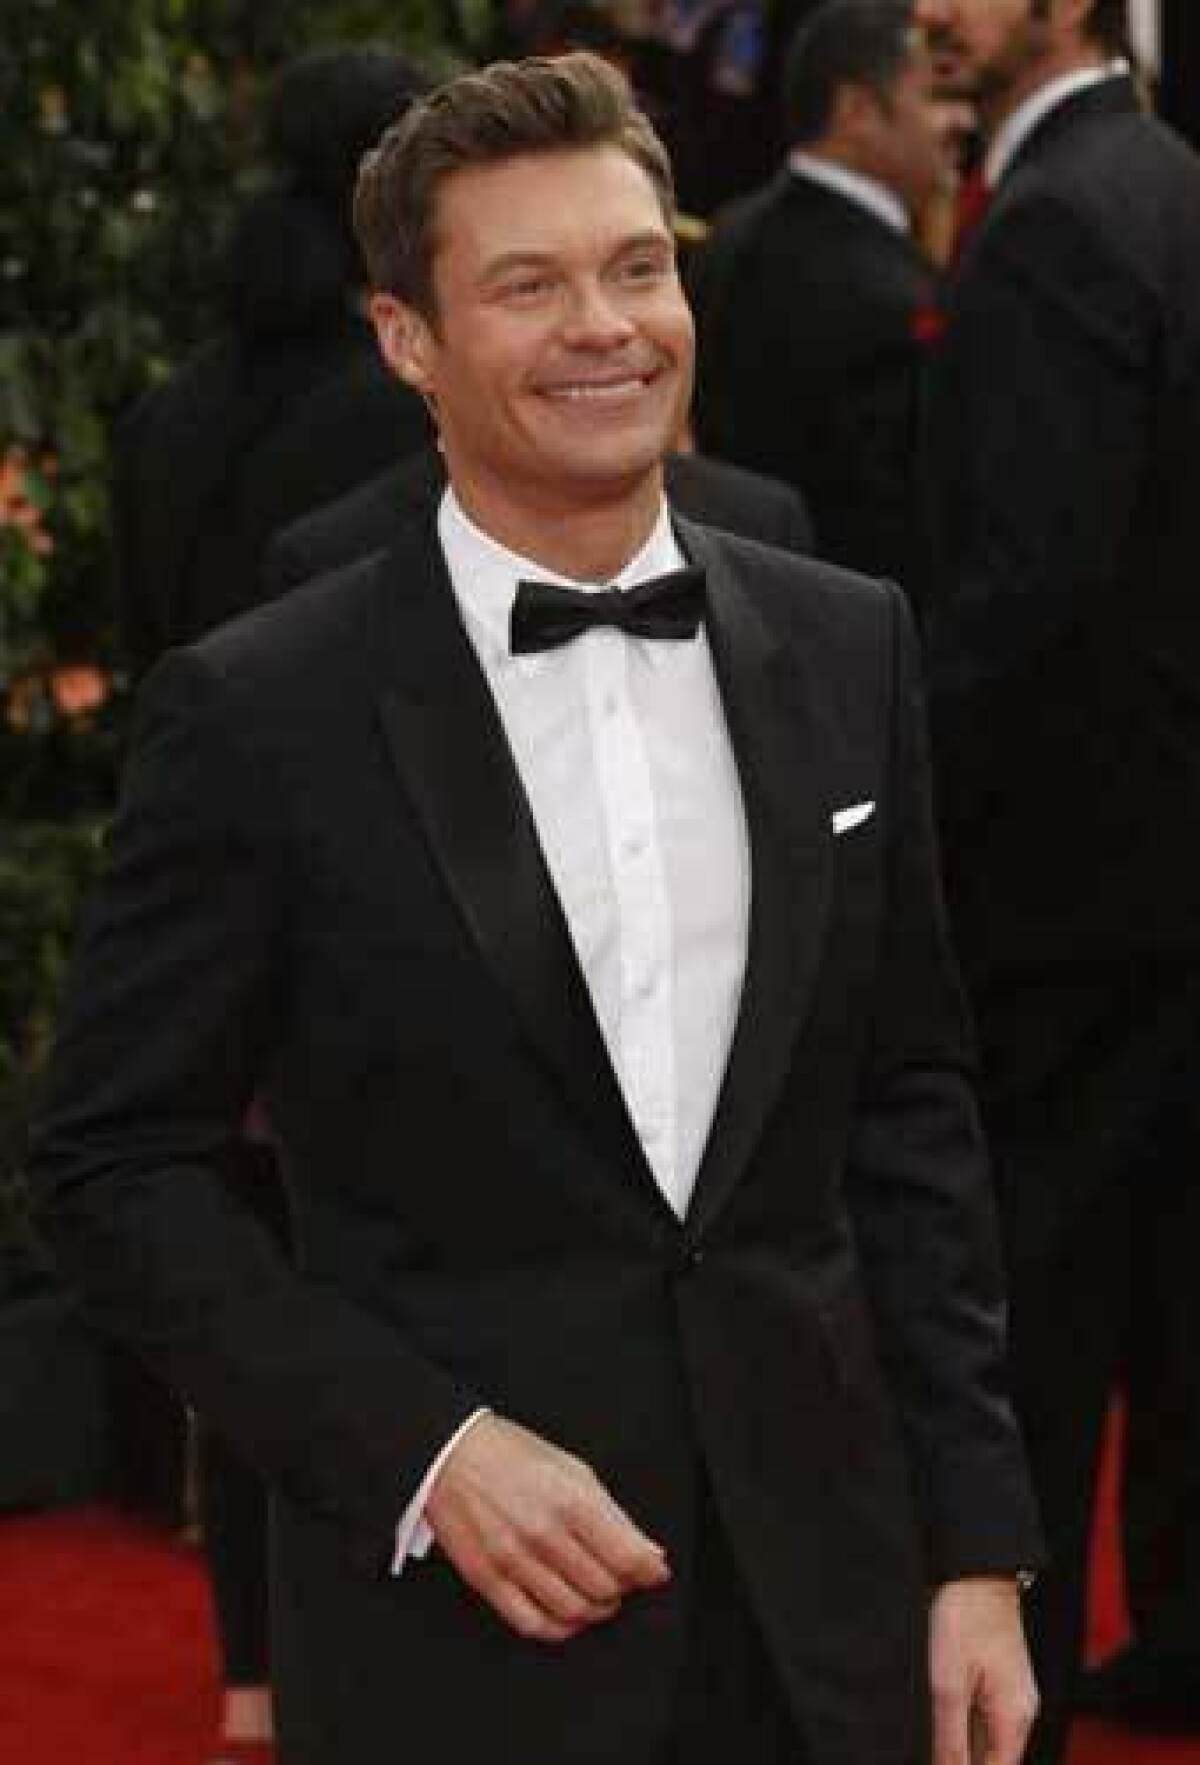 Ryan Seacrest appeared on the red carpet at the 69th Annual Golden Globe Awards show at the Beverly Hilton on Sunday, Jan. 15, 2012.